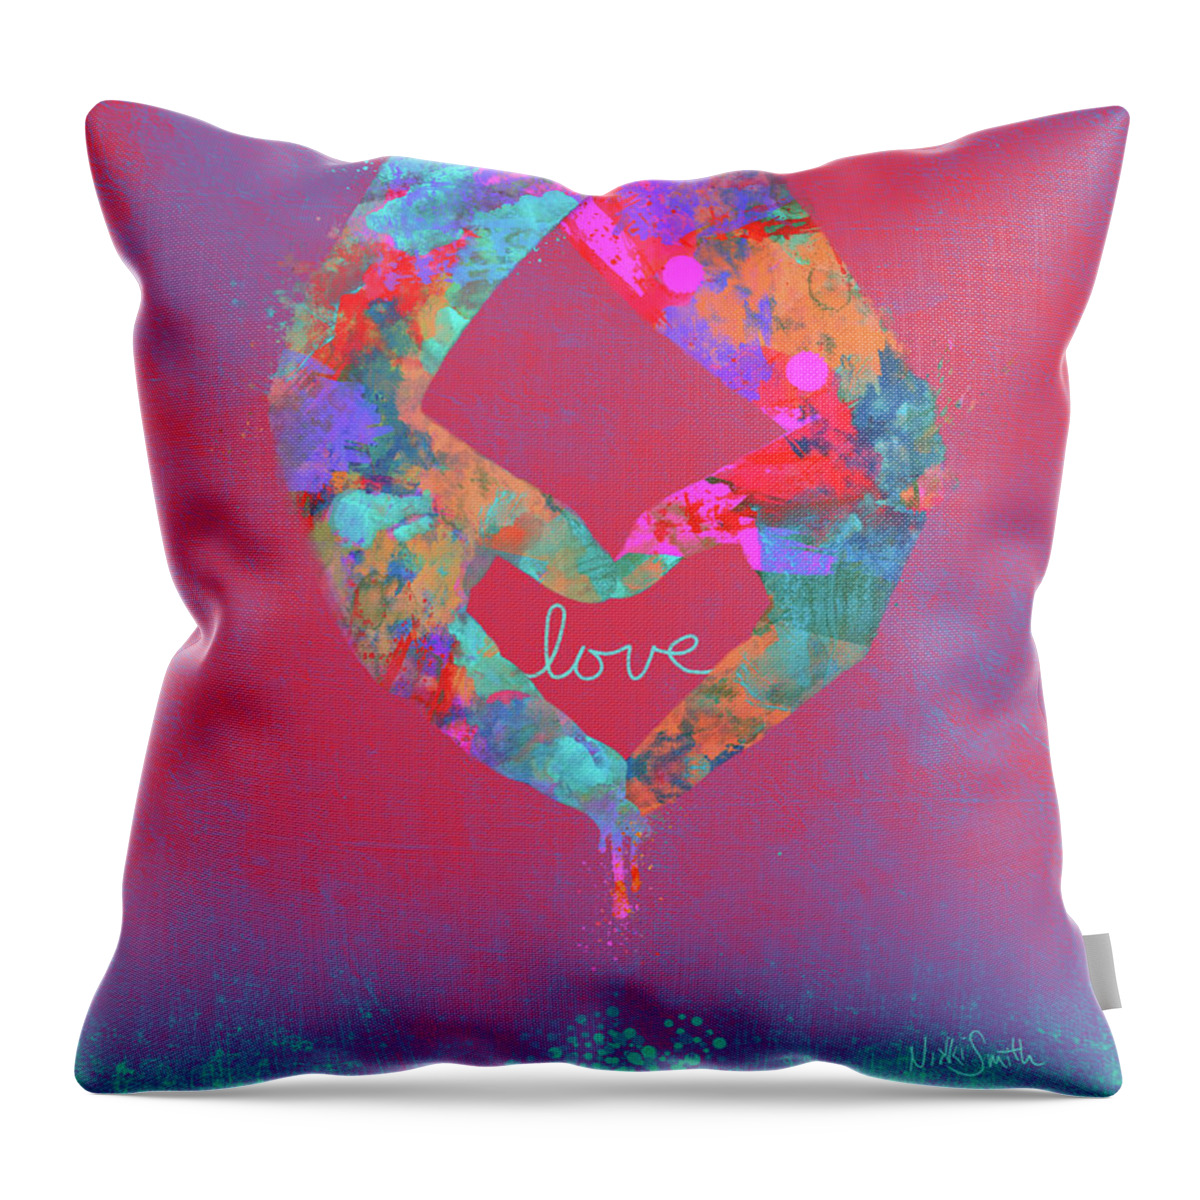 Love Throw Pillow featuring the digital art Holding Hands In Love by Nikki Marie Smith